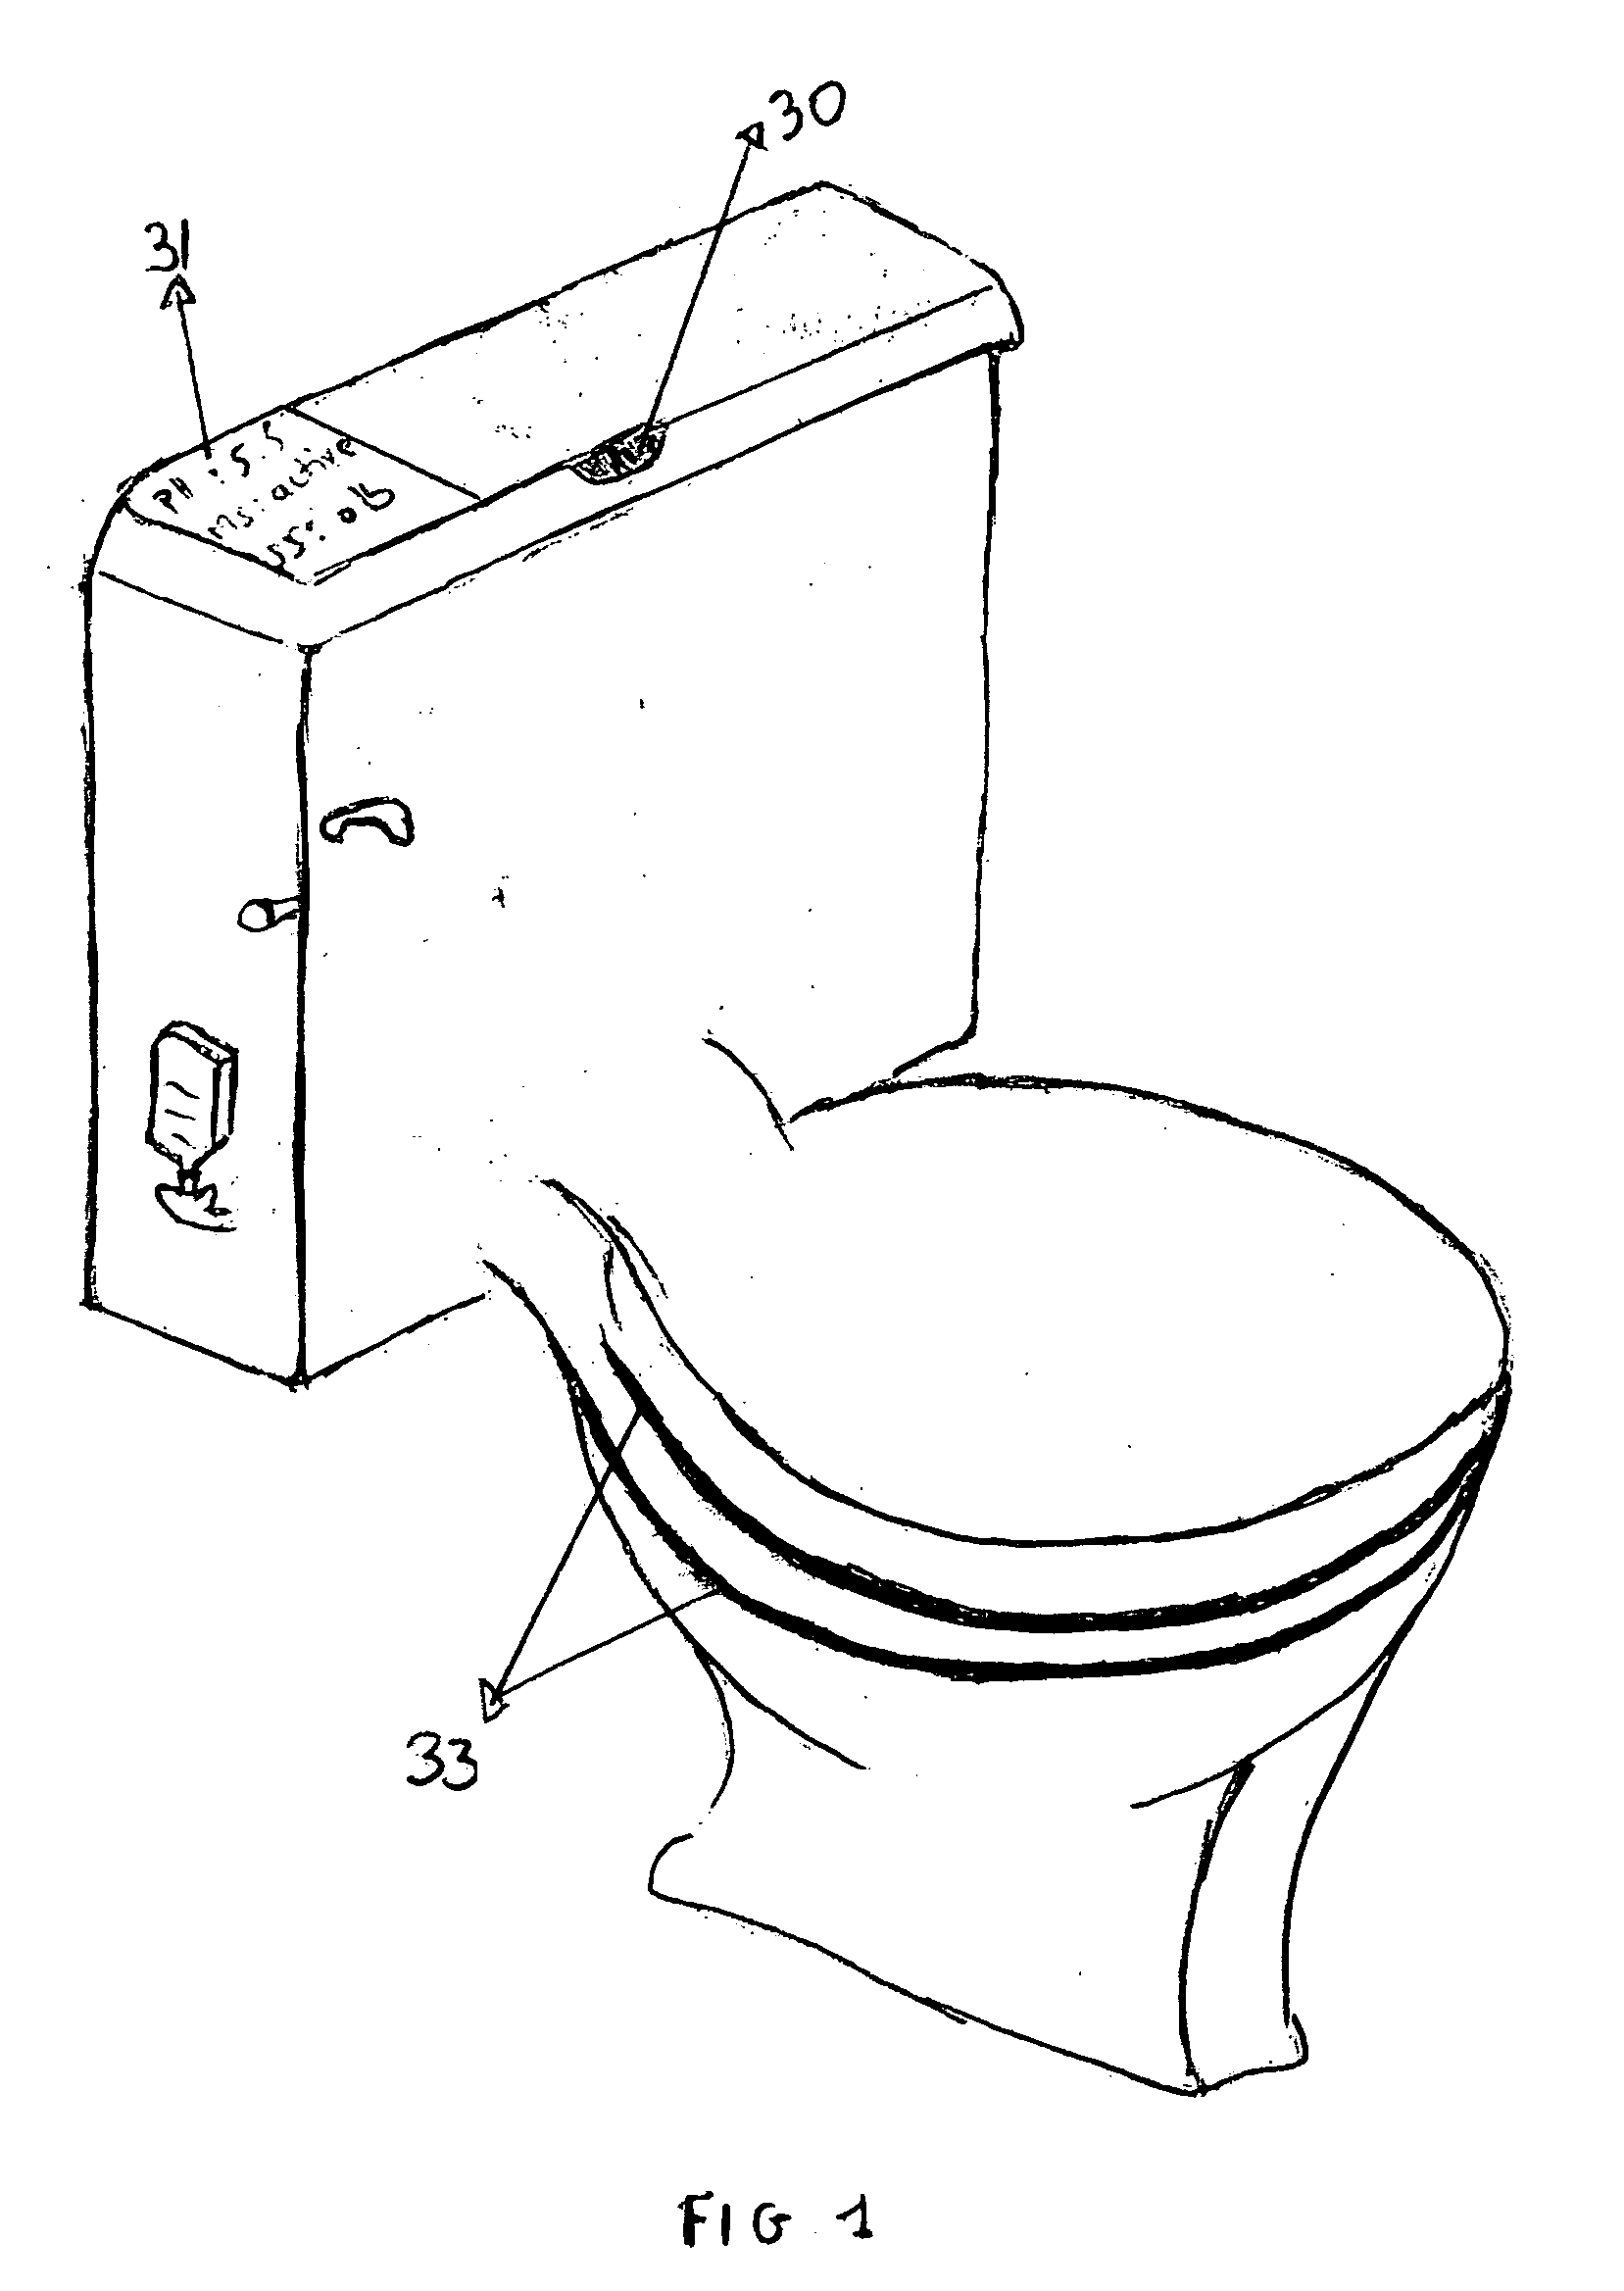 Self-cleaning toilet with an optional self flushing system